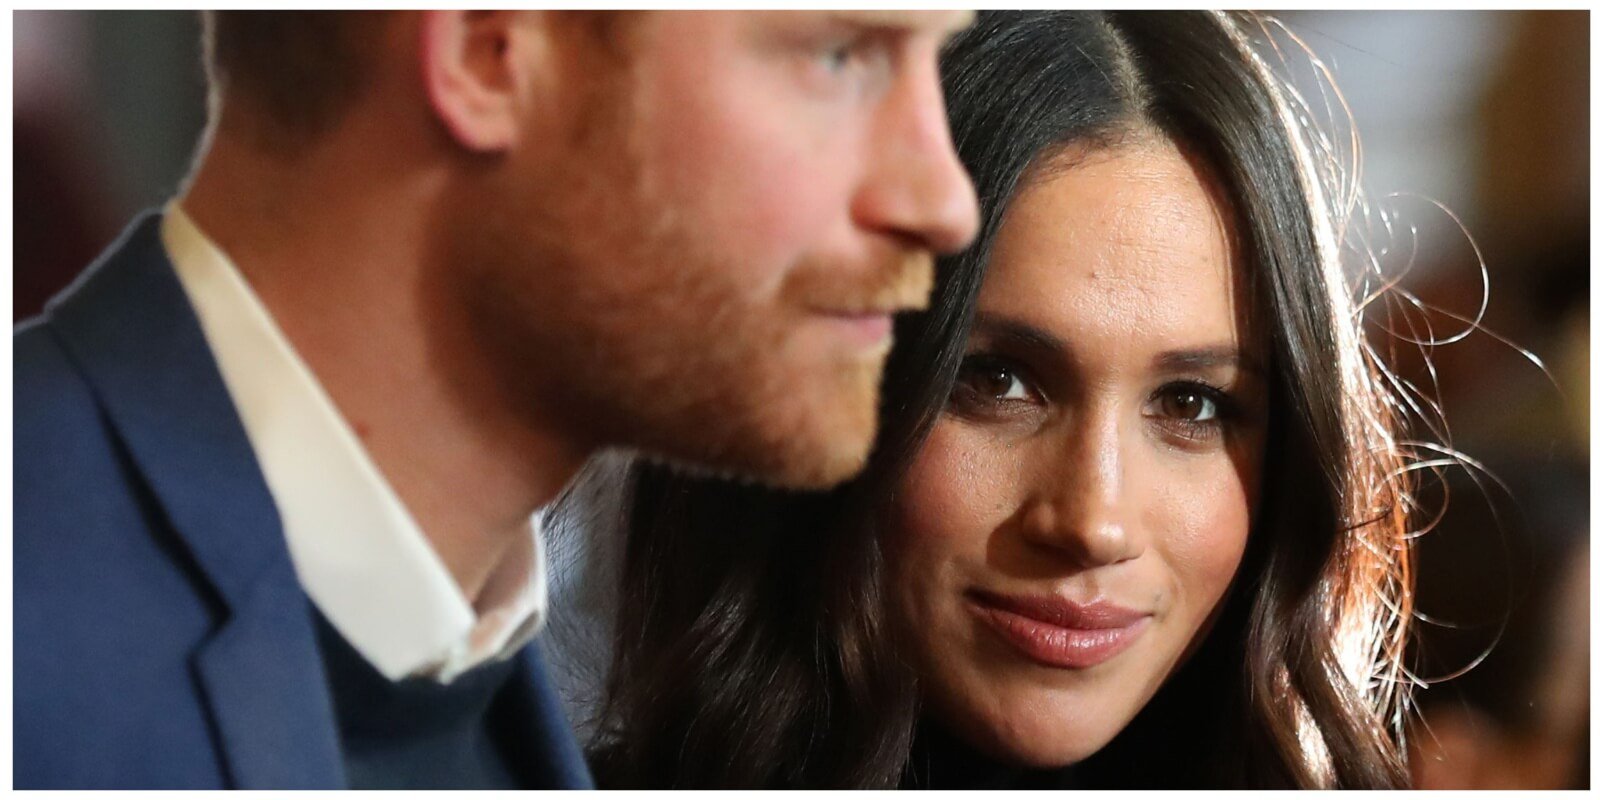 Prince Harry and Meghan Markle are photographed at a reception for young people at the Palace of Holyroodhouse on February 13, 2018 in Edinburgh, Scotland.